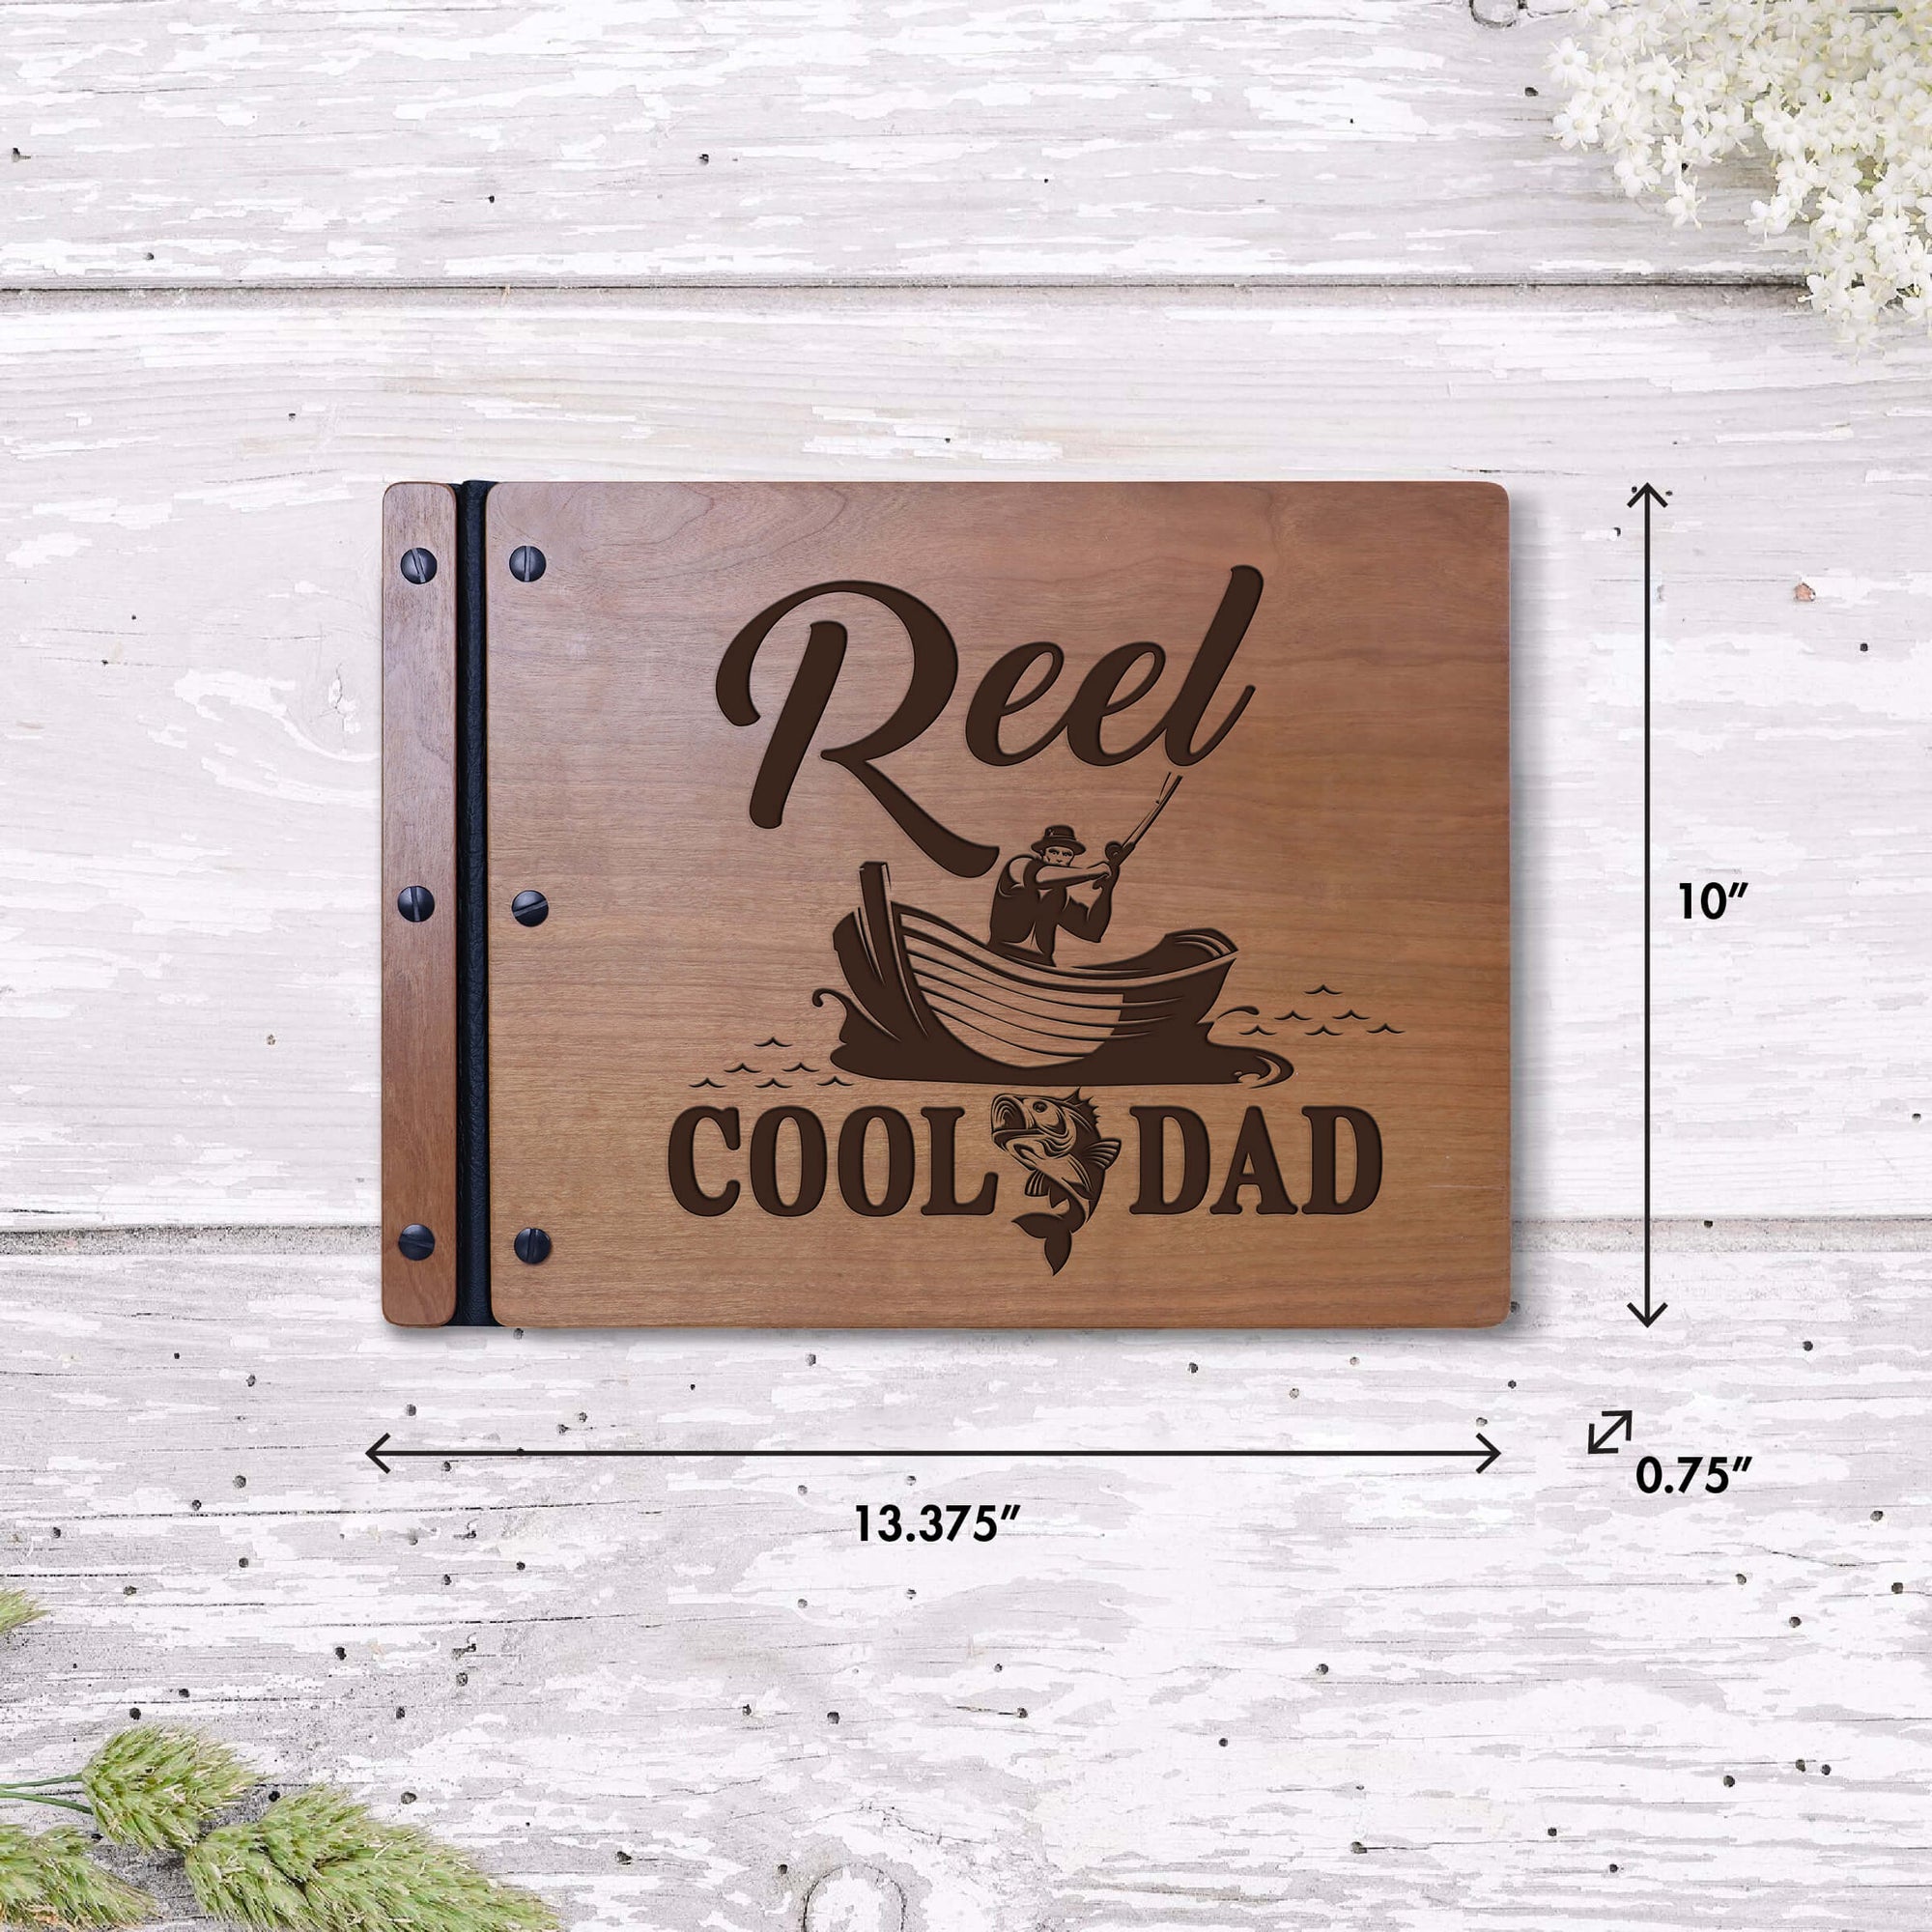 Beautiful Wooden Guestbook to Honor Your Loved One's Memory